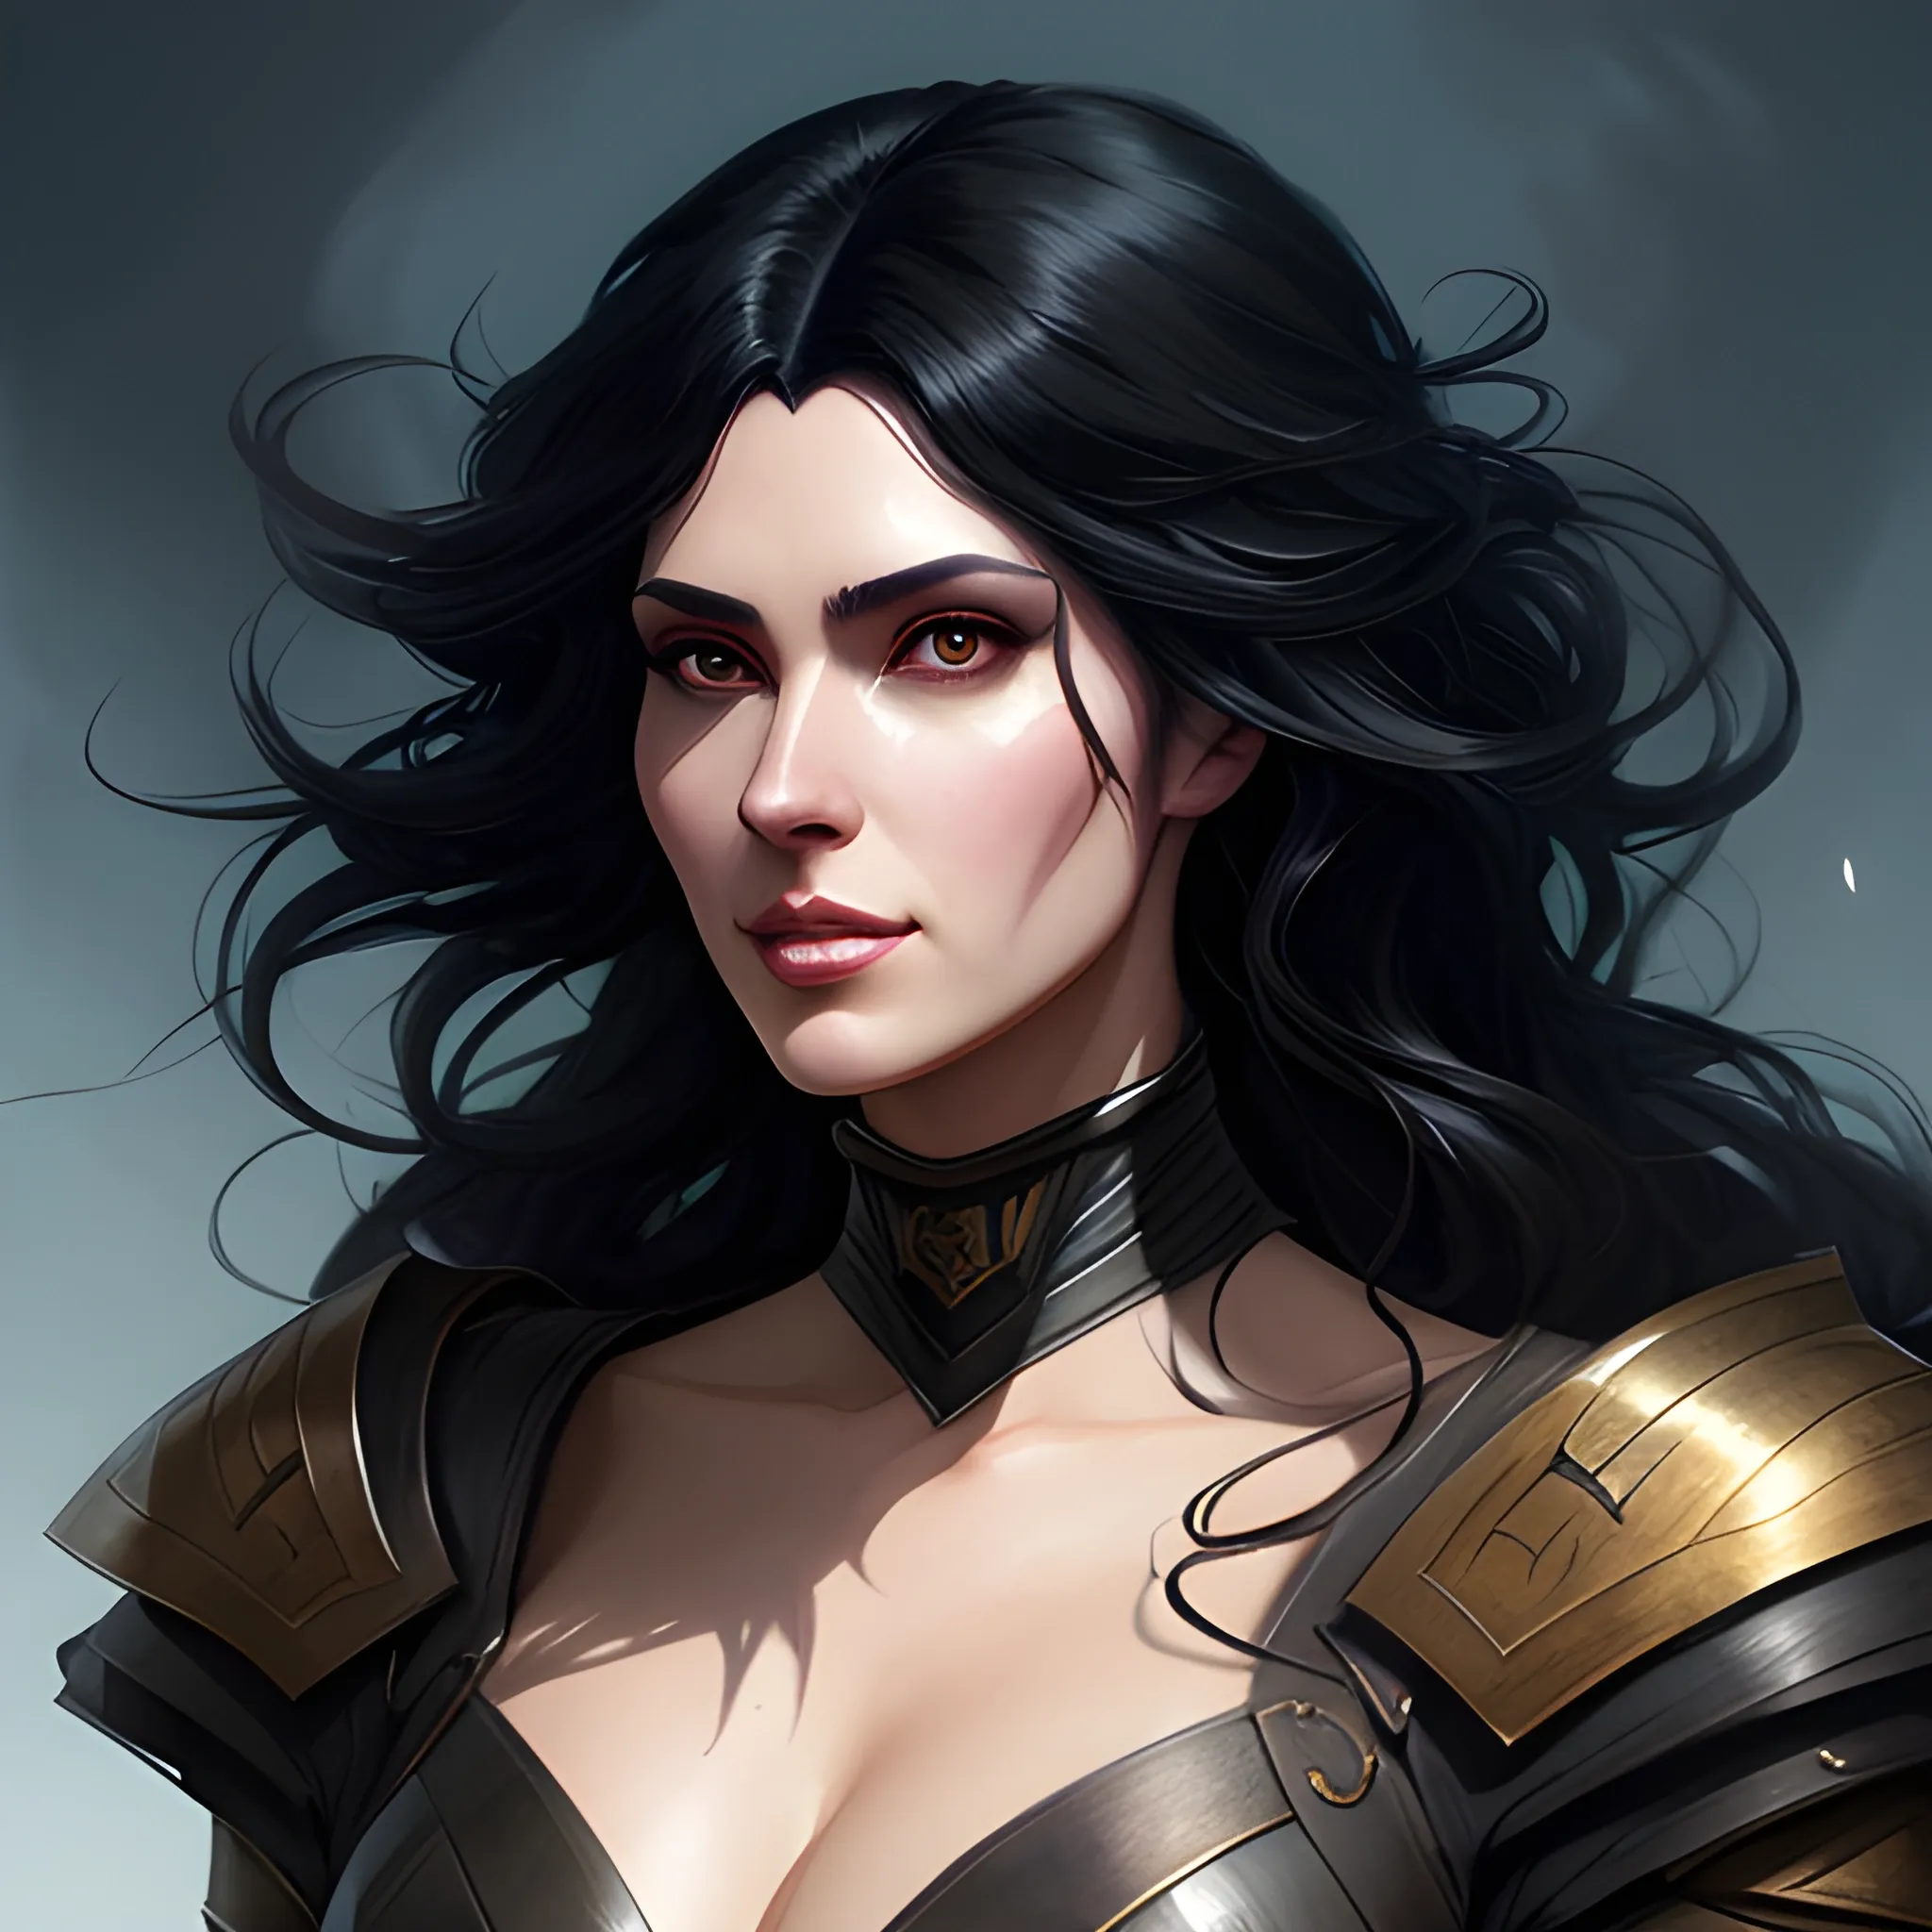 facing viewer, black hair, fantasy medieval outfit, realistic po ...